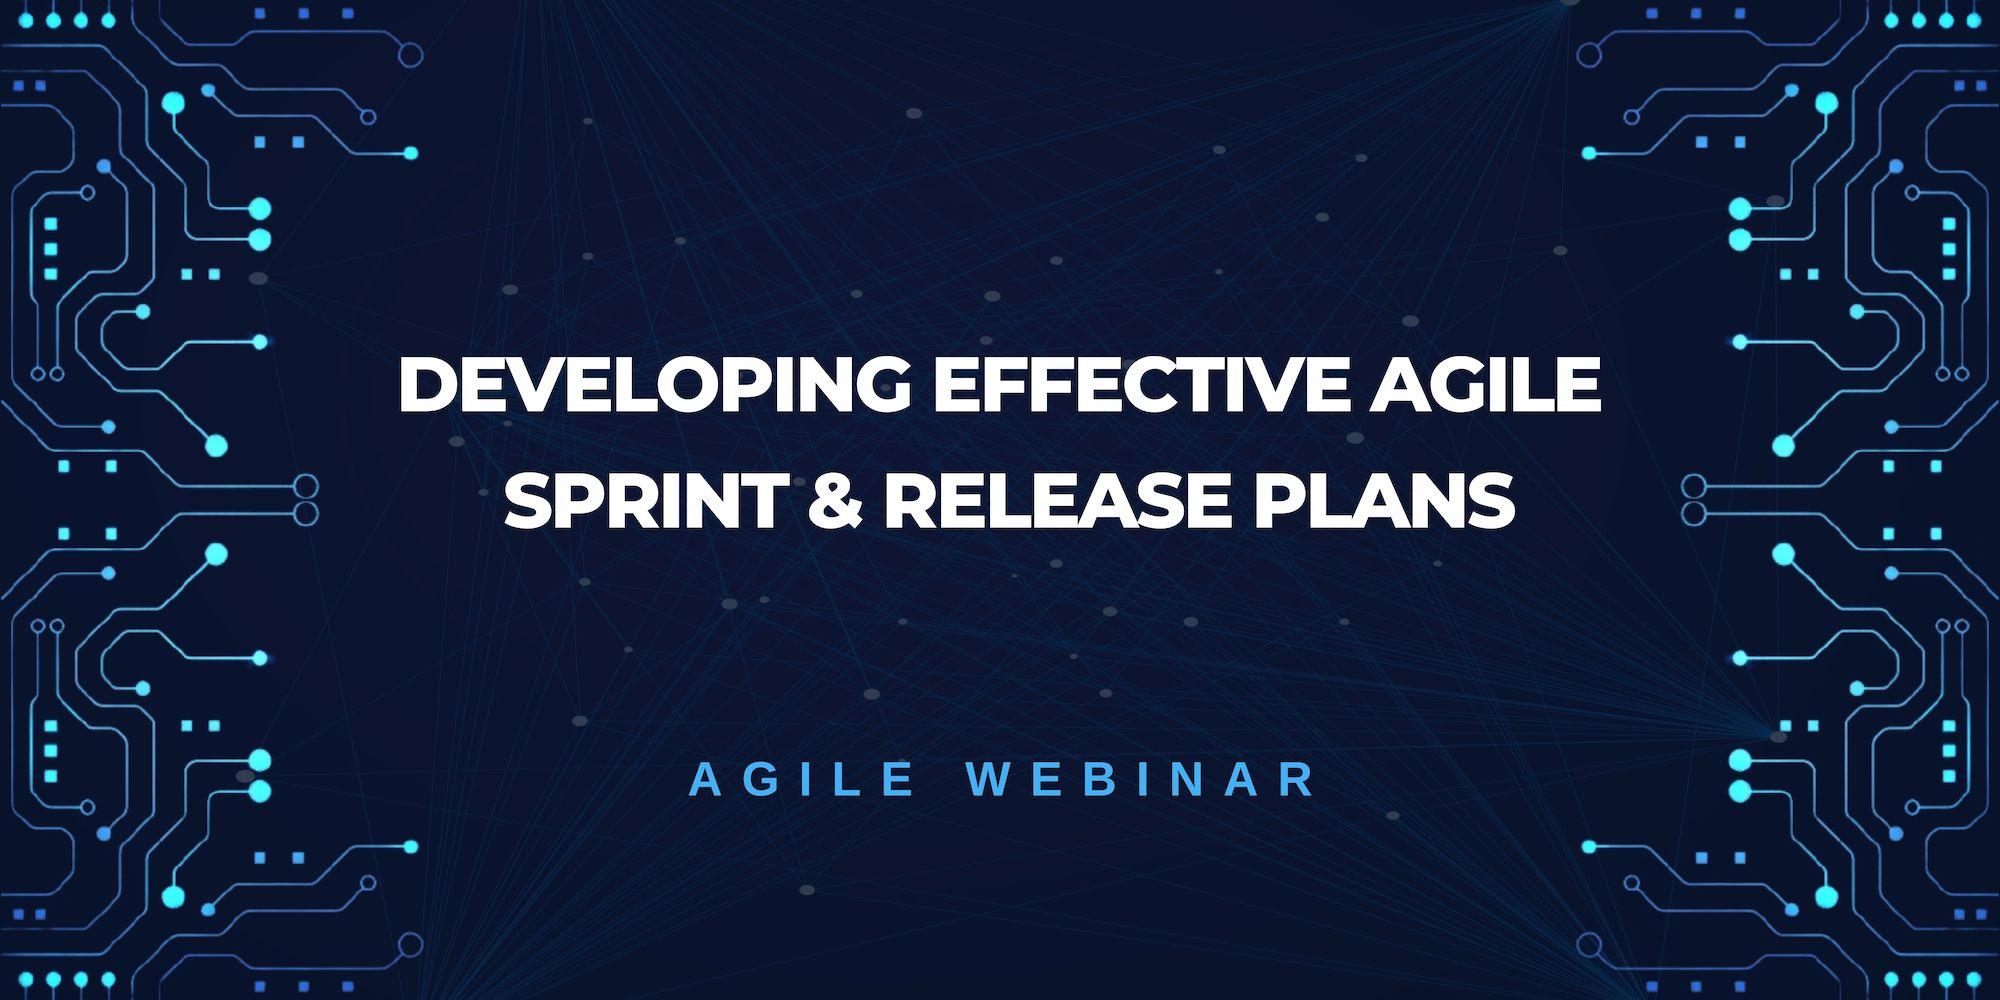 Agilw-Sprint-and-Release-plans-April-2023.jpg